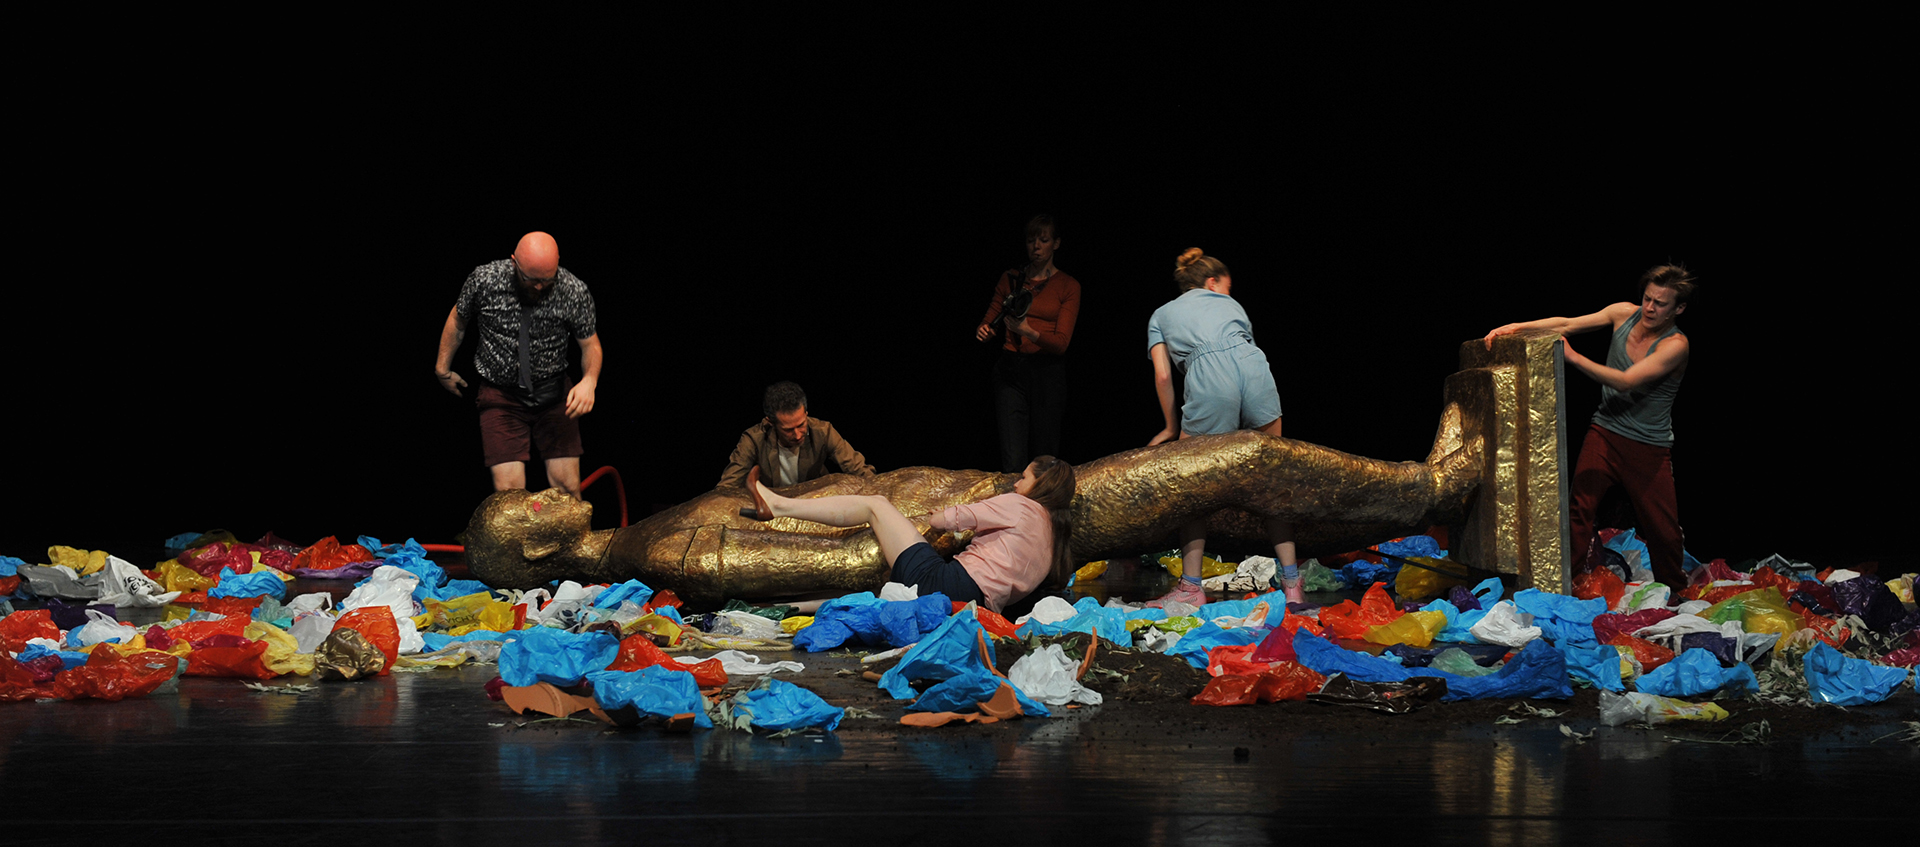 Six performers in various outfits surround a large, toppled gold statue of a deity lying on a stage that is covered in colorful plastic bags.